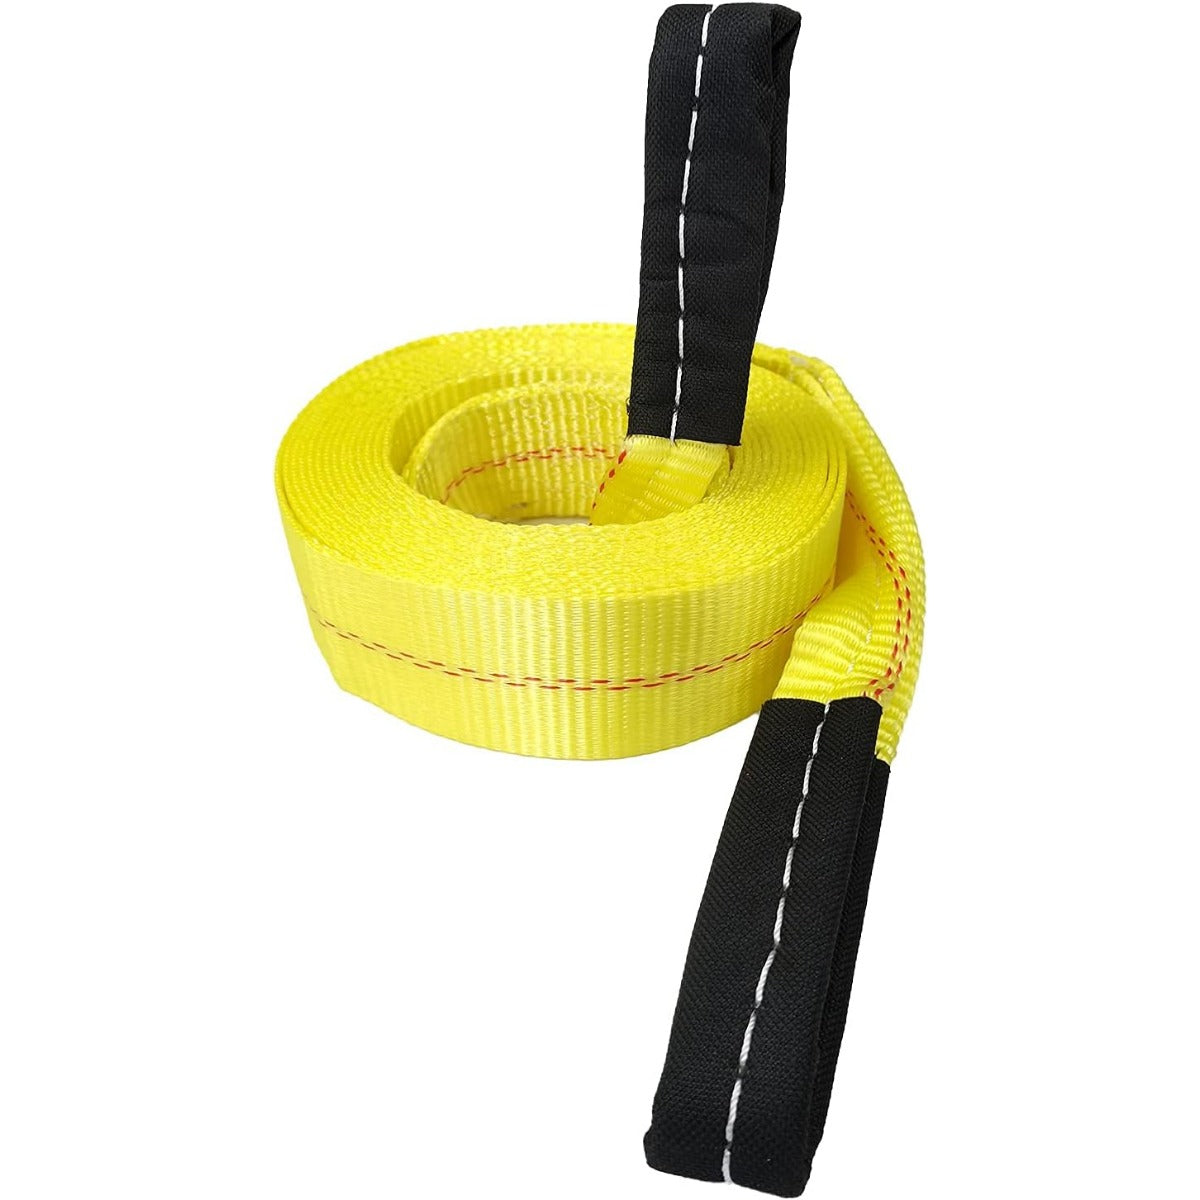  AIJIWU Tow Rope, Car Heavy Duty Recovery Tow Straps 17600Ib 8  Ton 5M with 2 Hooks 2 Anti-Proof Gloves : Automotive